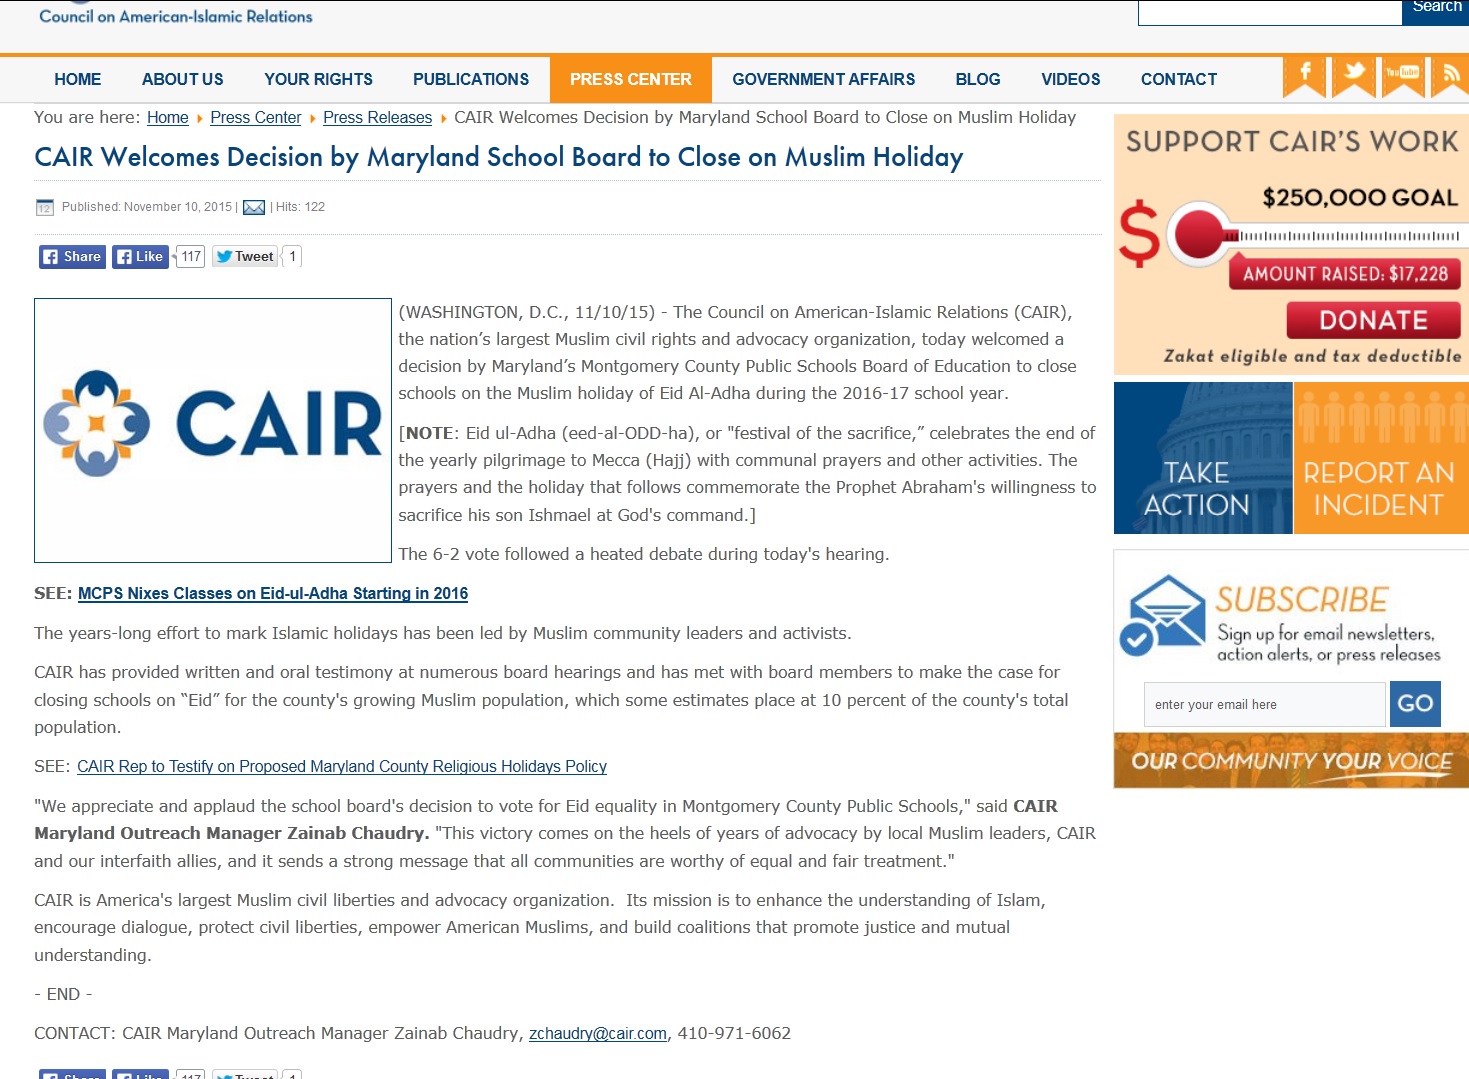 Nov_10_2015__CAIR_Welcomes_Decision_by_Maryland_School_Board_to_Close_on_Muslim_Holiday.jpg